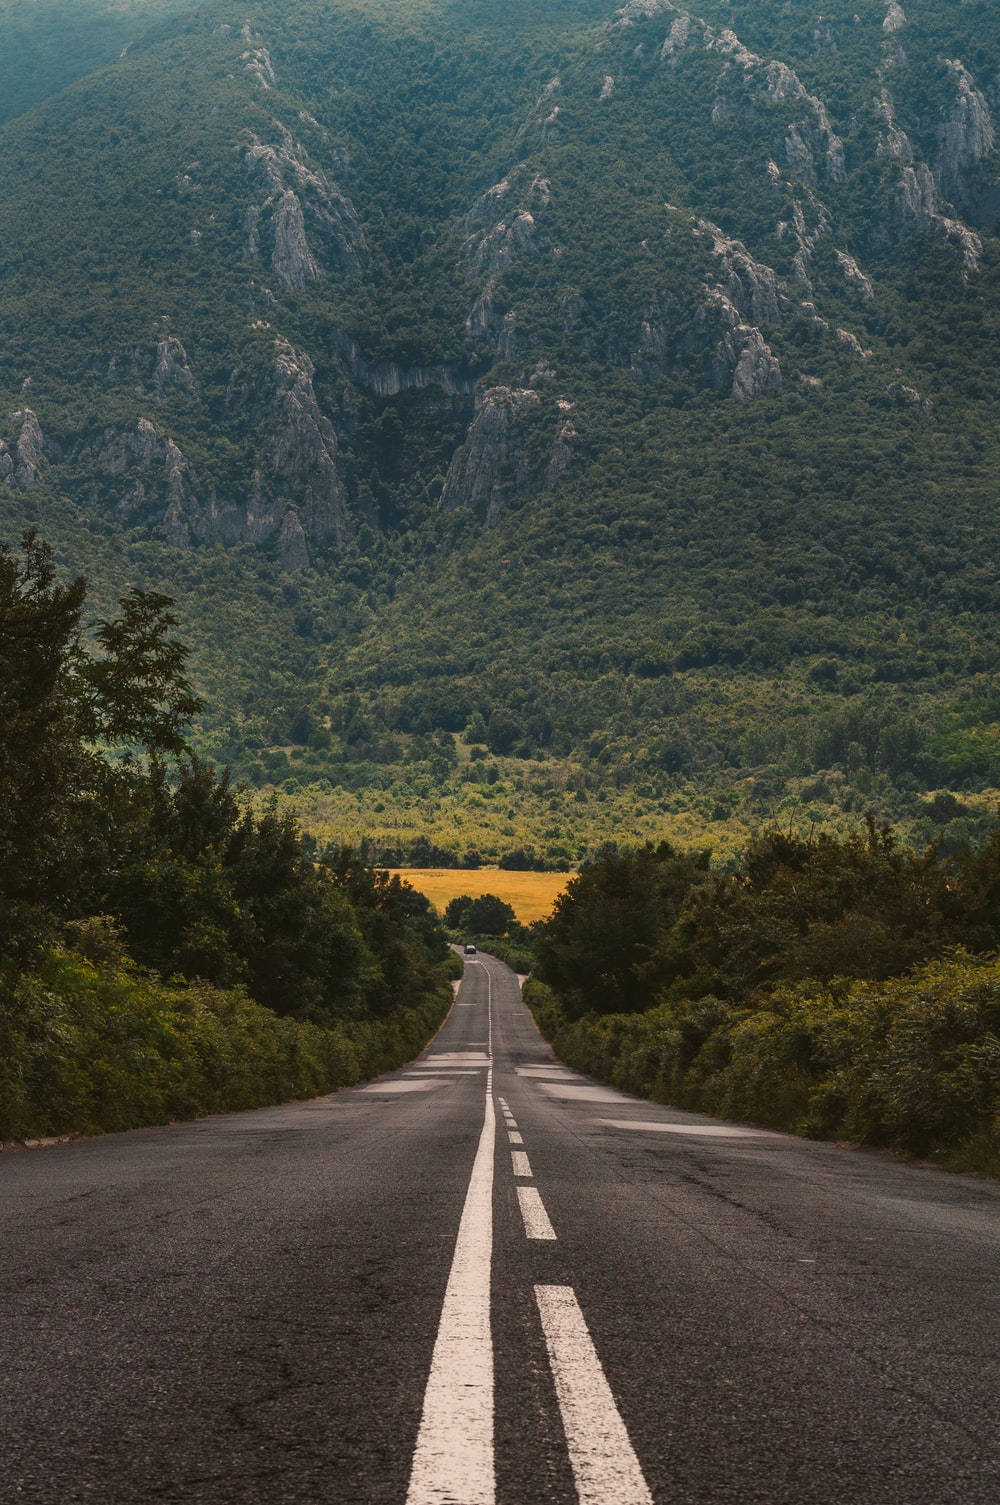 Straight Road Picture. Download Free Image